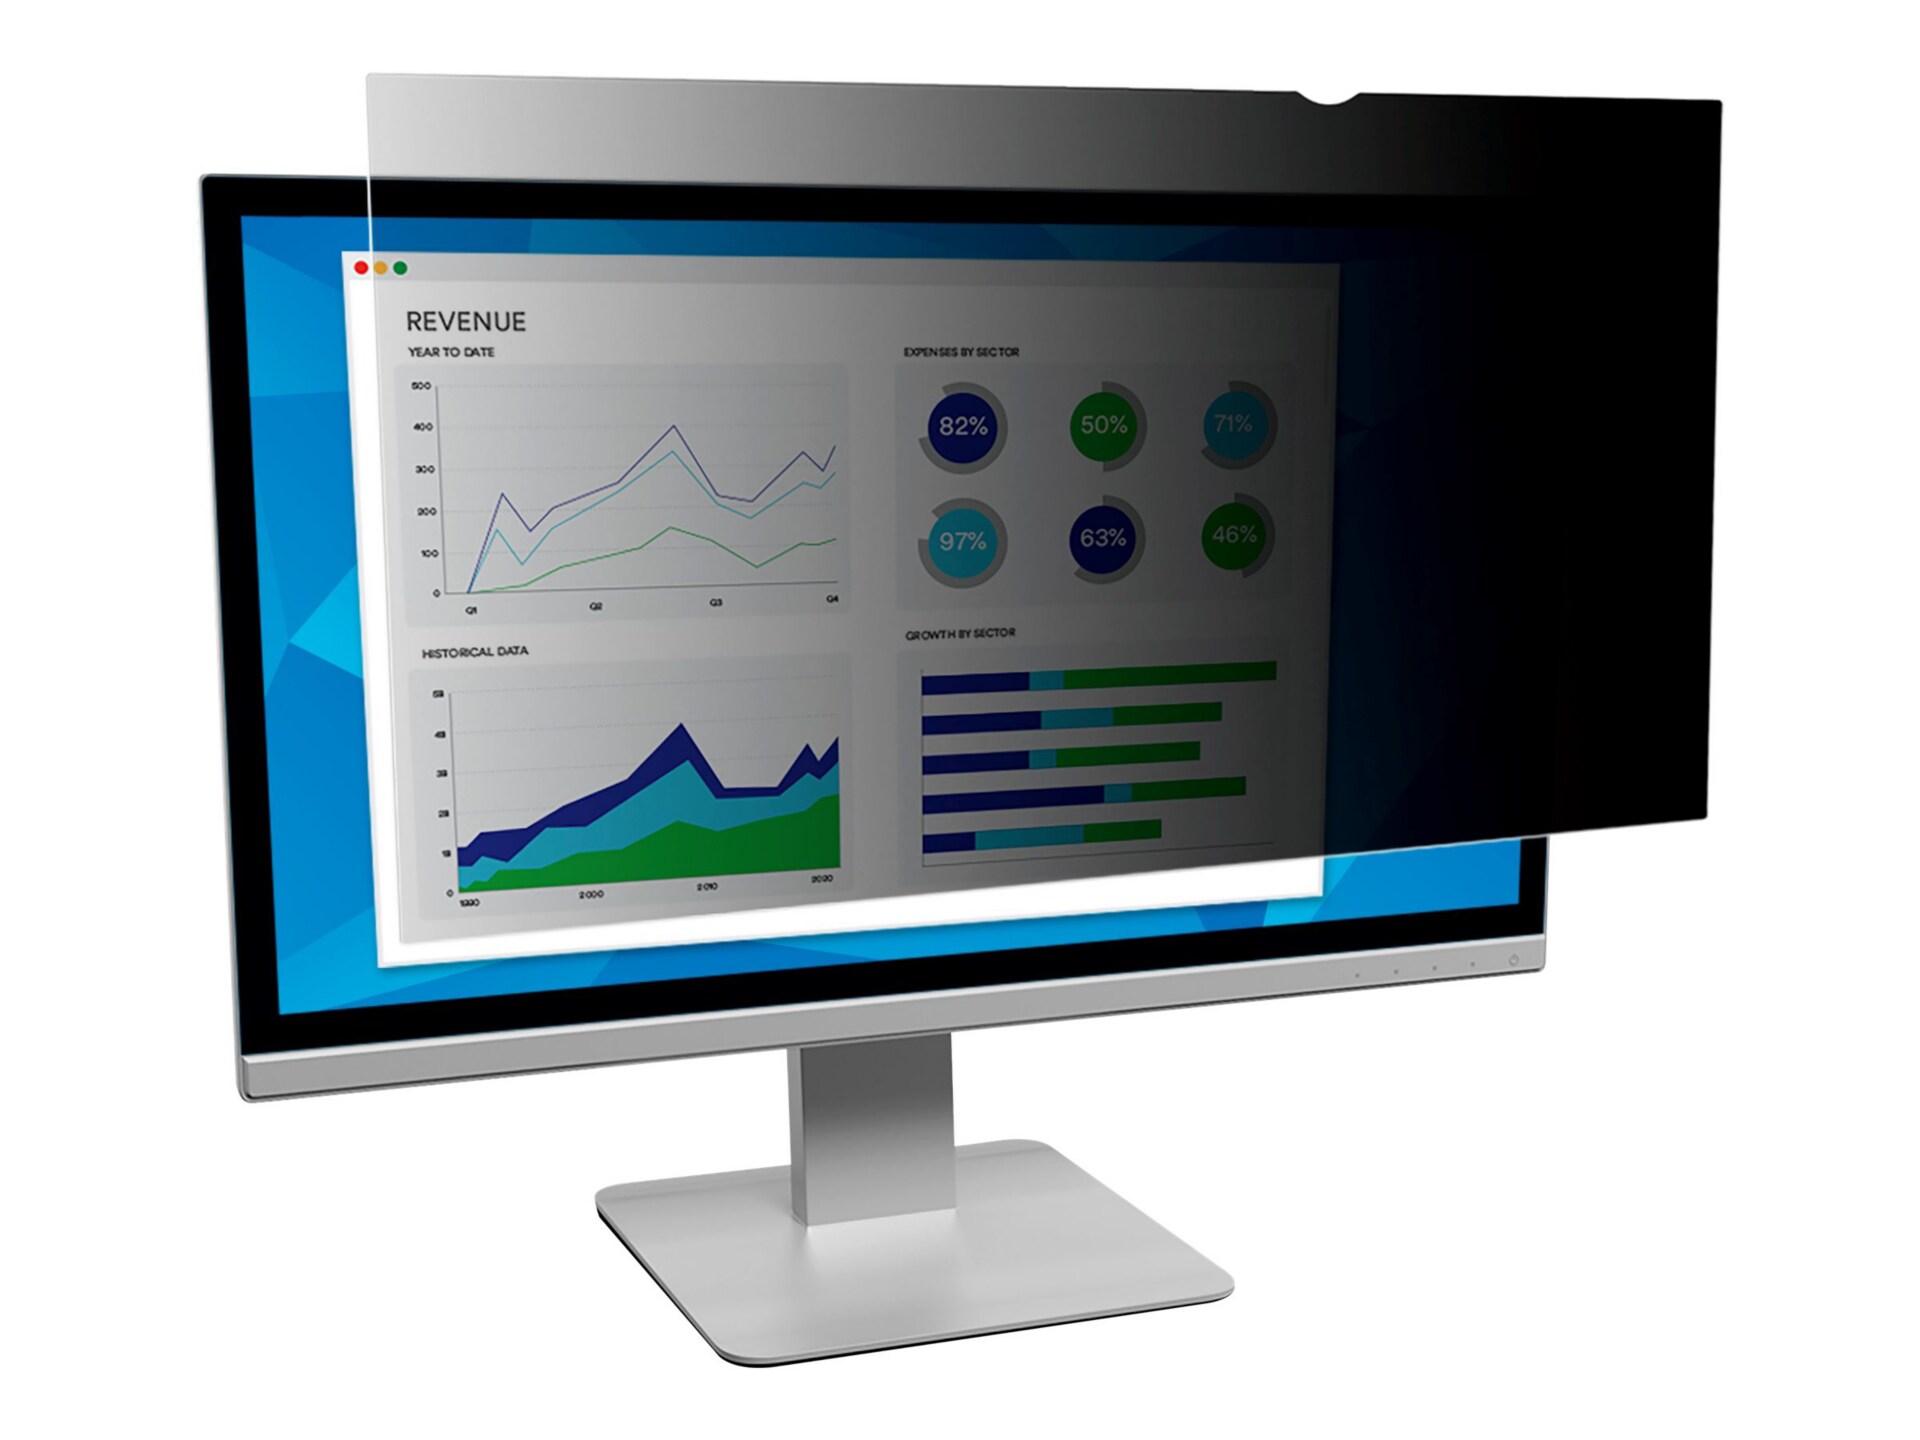 3M Privacy Filter for 23.8" Monitors 16:9 - display privacy filter - 23.8"